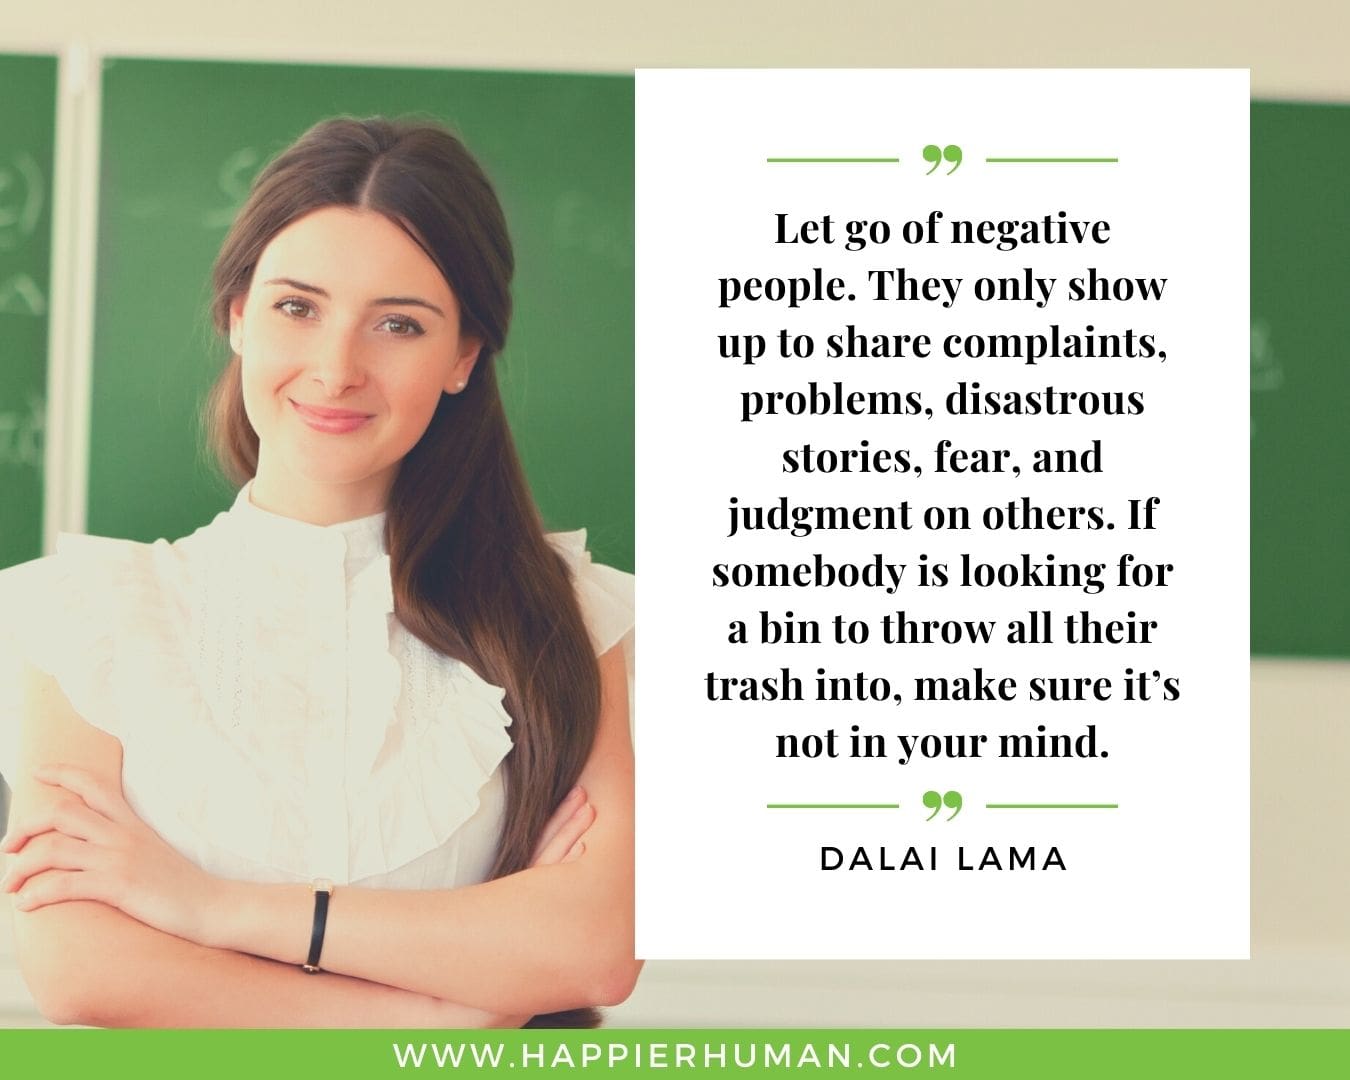 Toxic People Quotes - “Let go of negative people. They only show up to share complaints, problems, disastrous stories, fear, and judgment on others. If somebody is looking for a bin to throw all their trash into, make sure it’s not in your mind.” – Dalai Lama